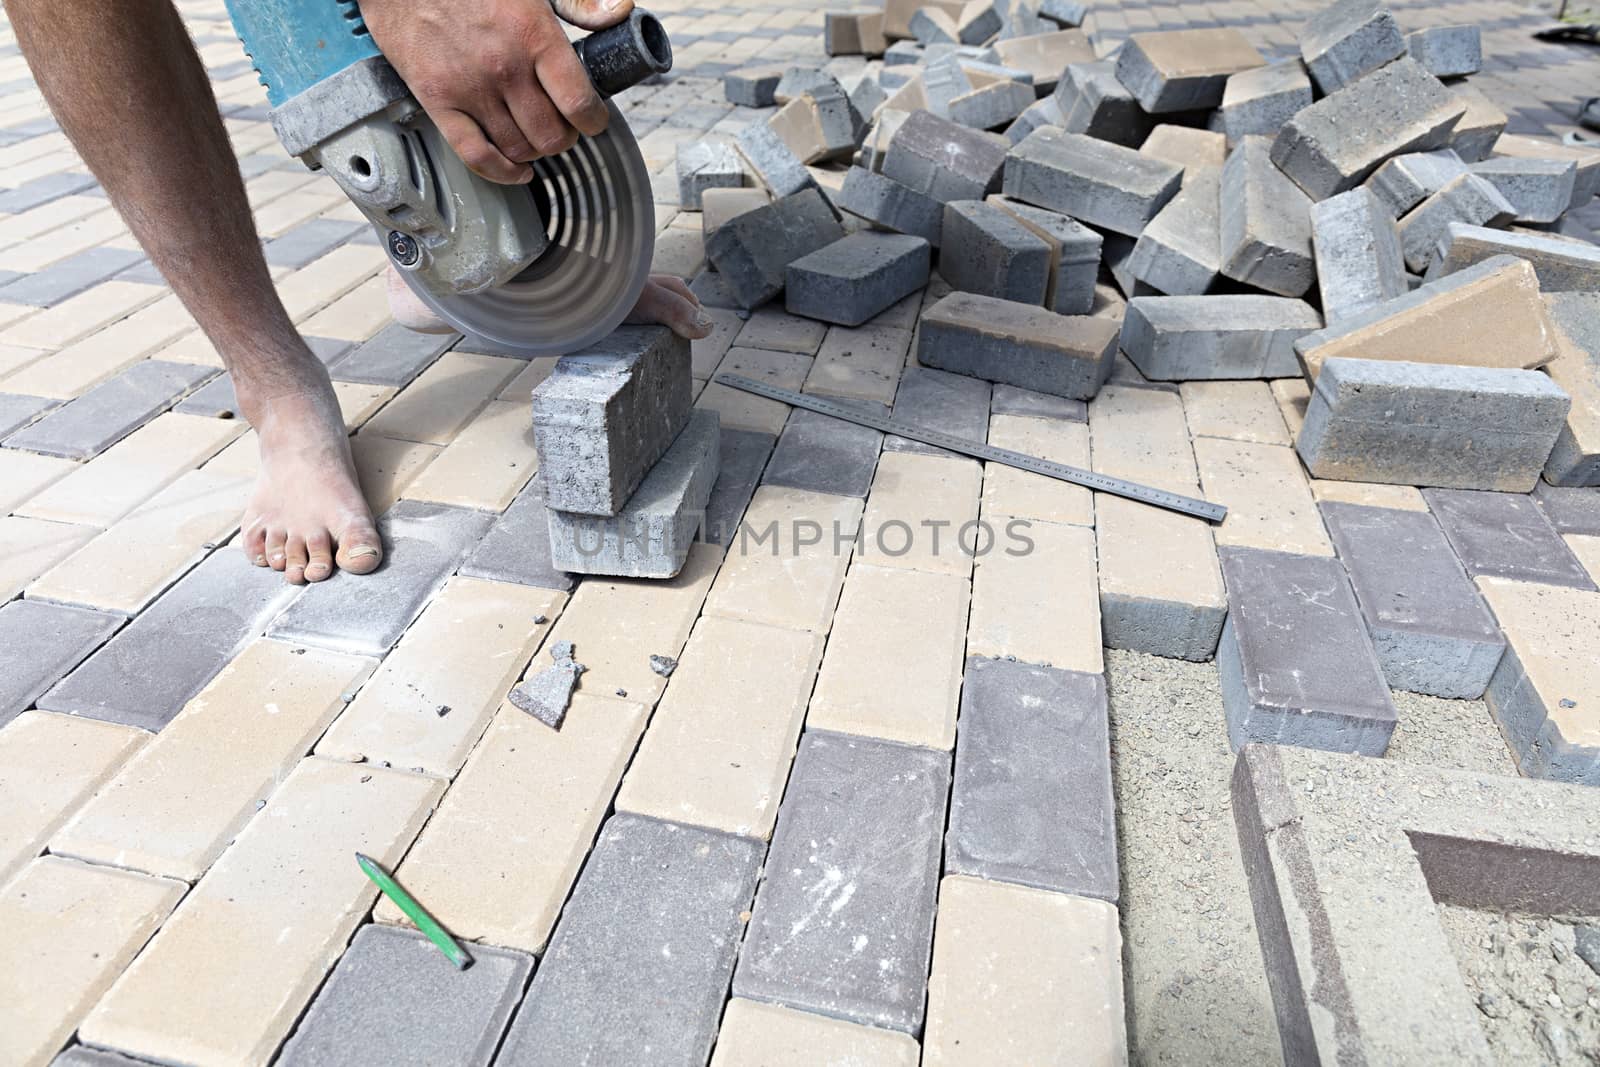 The worker cuts a bar of paving slabs for the final laying on the sidewalk